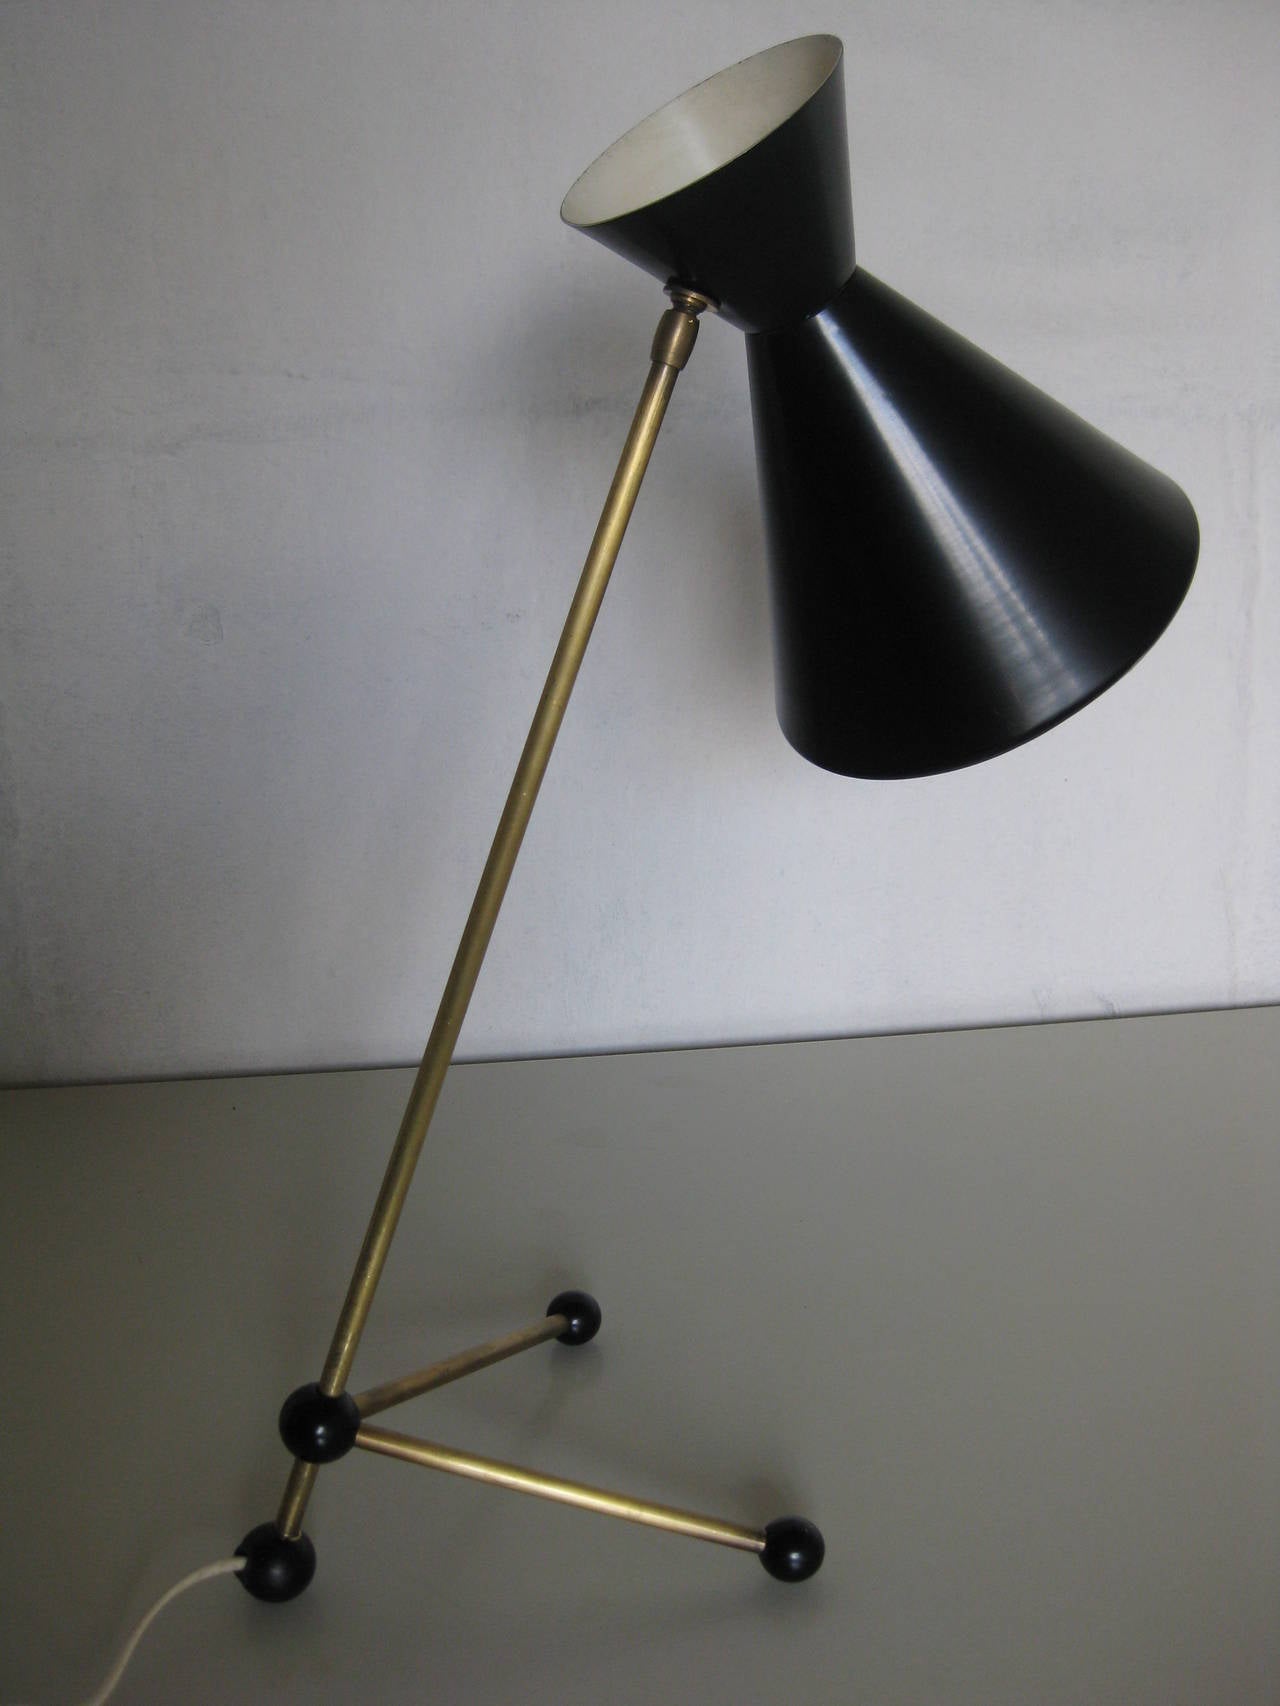 Very nice 50ies table lamp probably designed by Otto Kolb 1951
Brass rod stem and legs with adjustable connector,enamble metal shade and messing feet